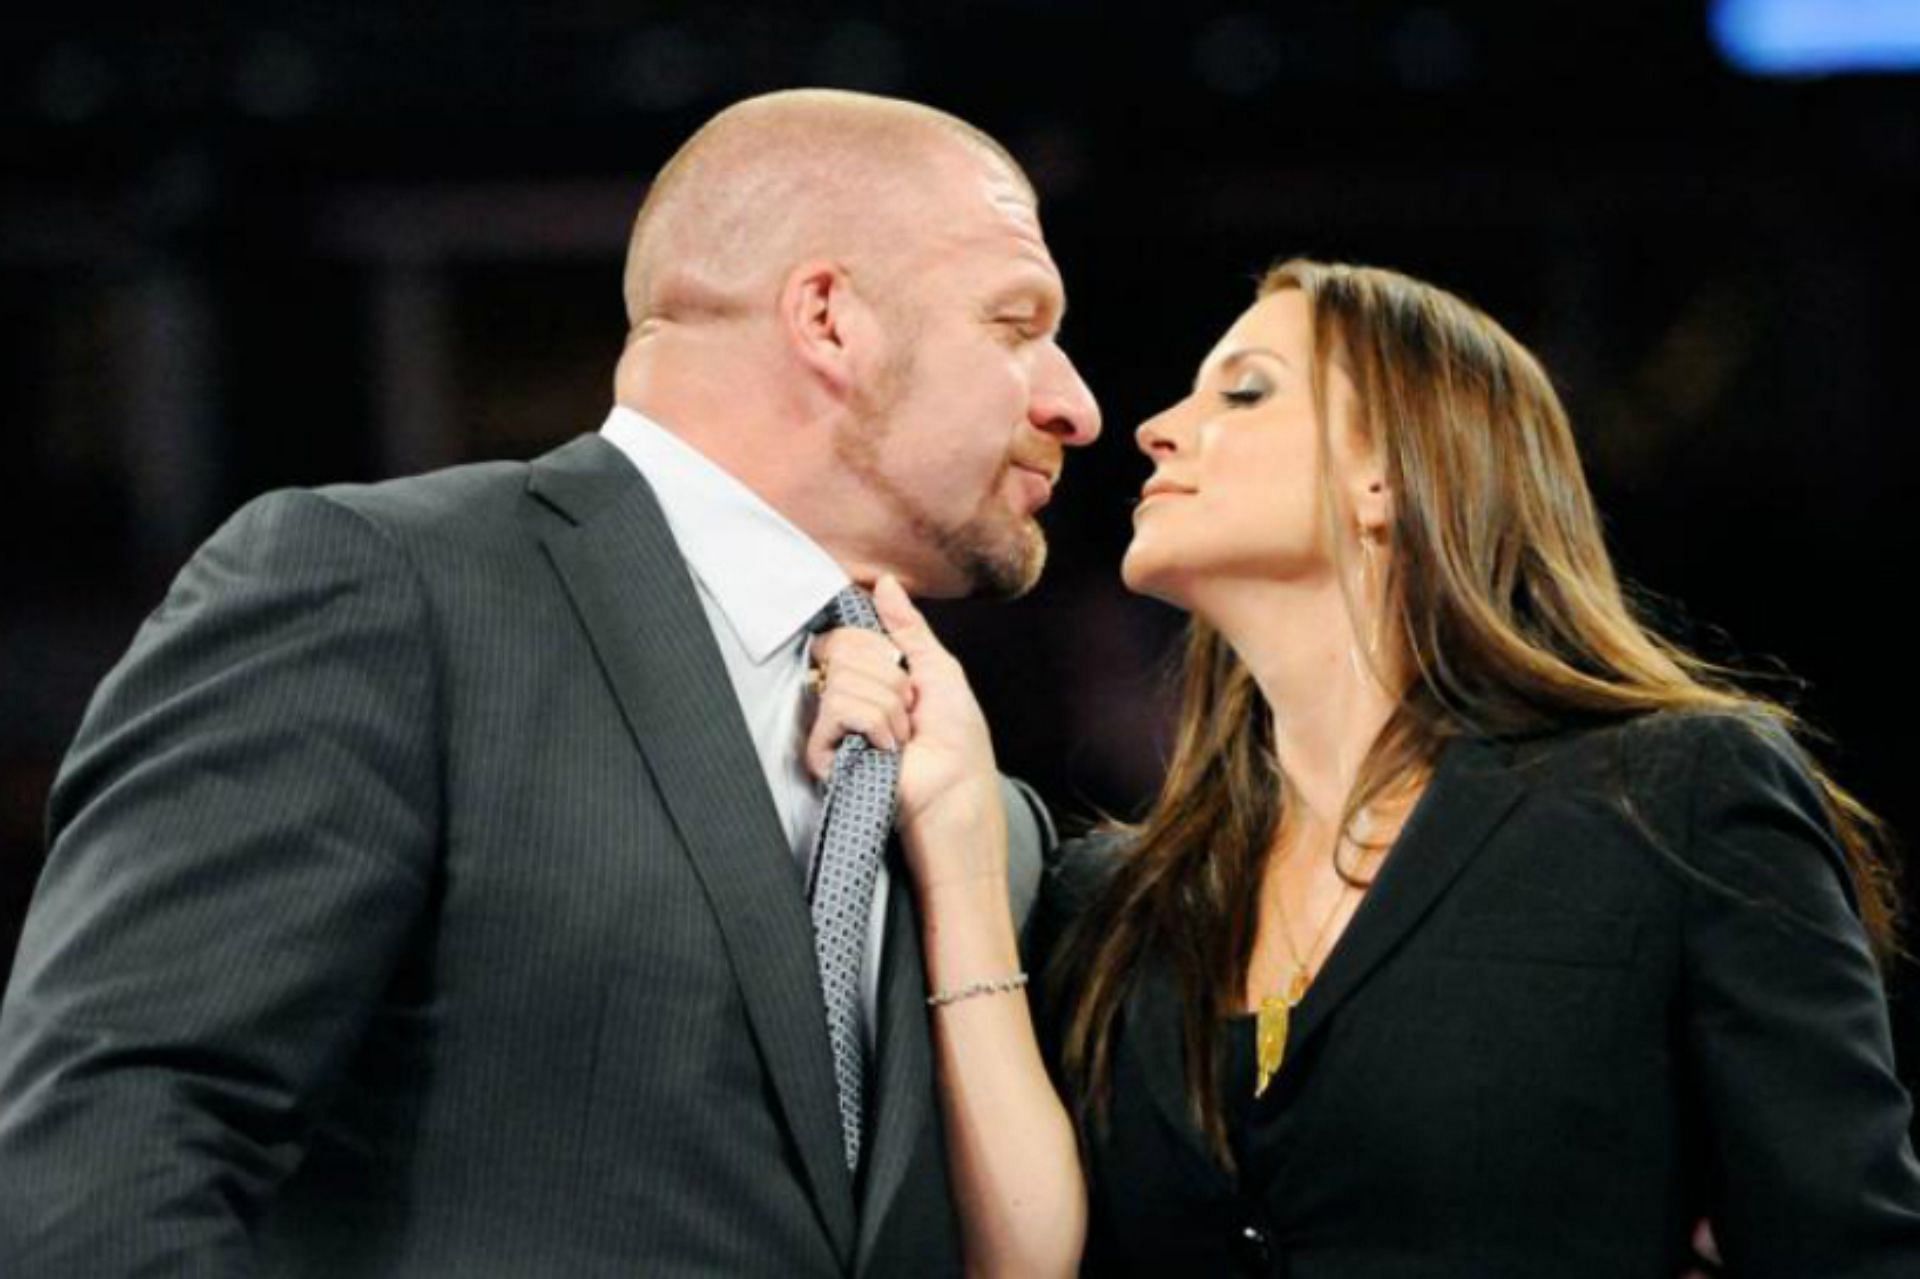 Triple H and Stephanie McMahon are the most powerful couple in professional wrestling.